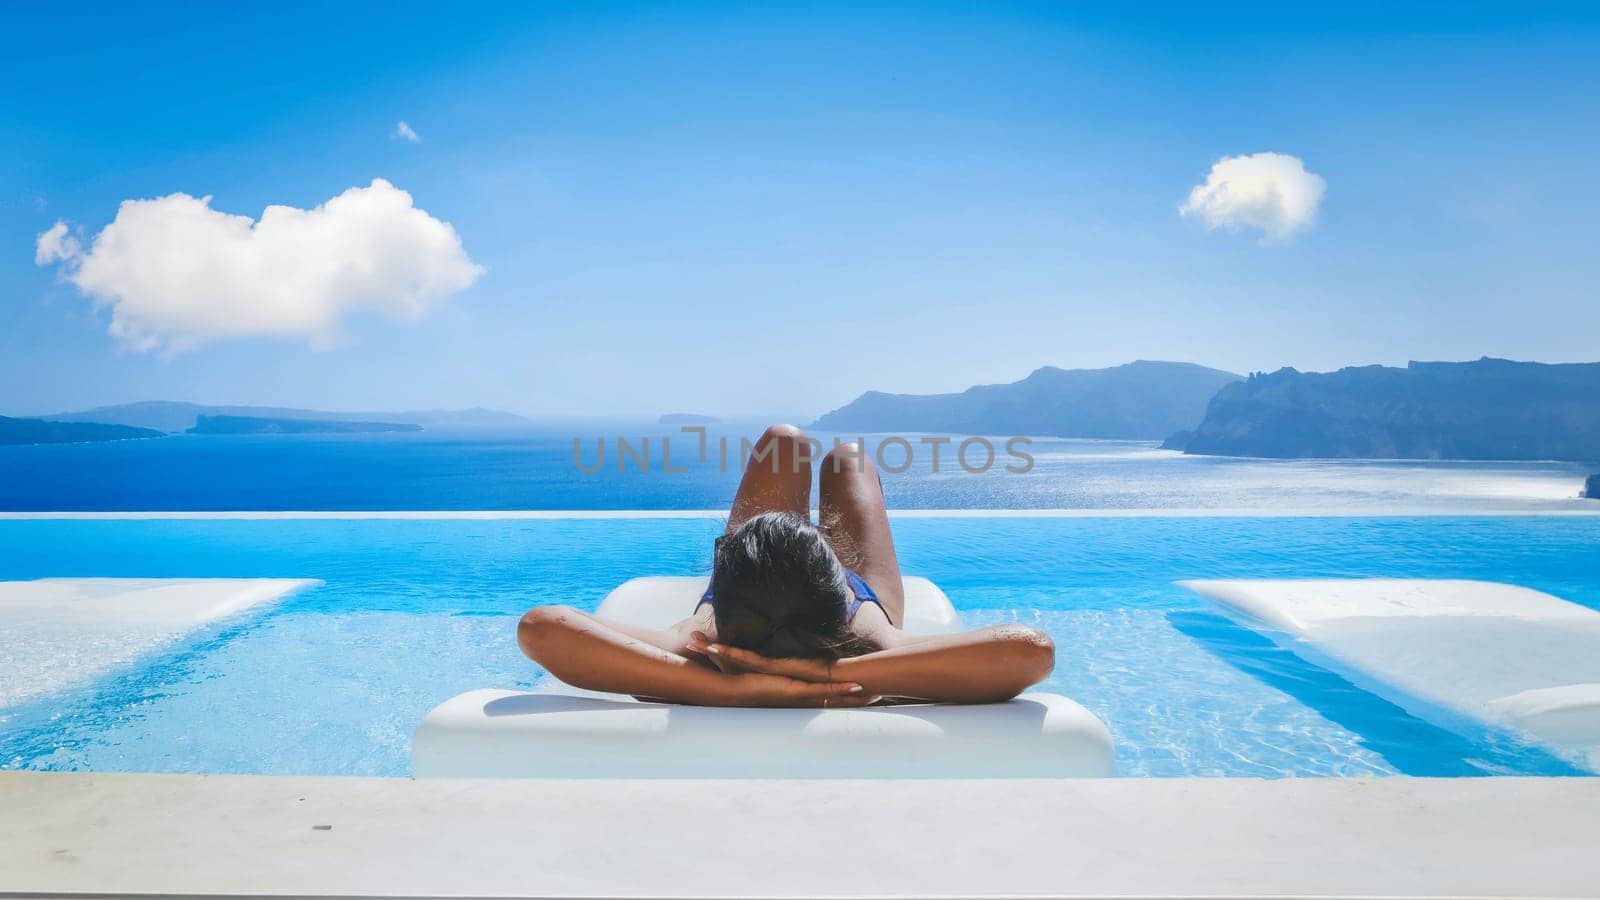 Young Asian women on vacation at Santorini relaxing in a swimming pool looking out over the Caldera ocean of Santorini, Oia Greece, Greek Island Aegean Cyclades during summer in Europe